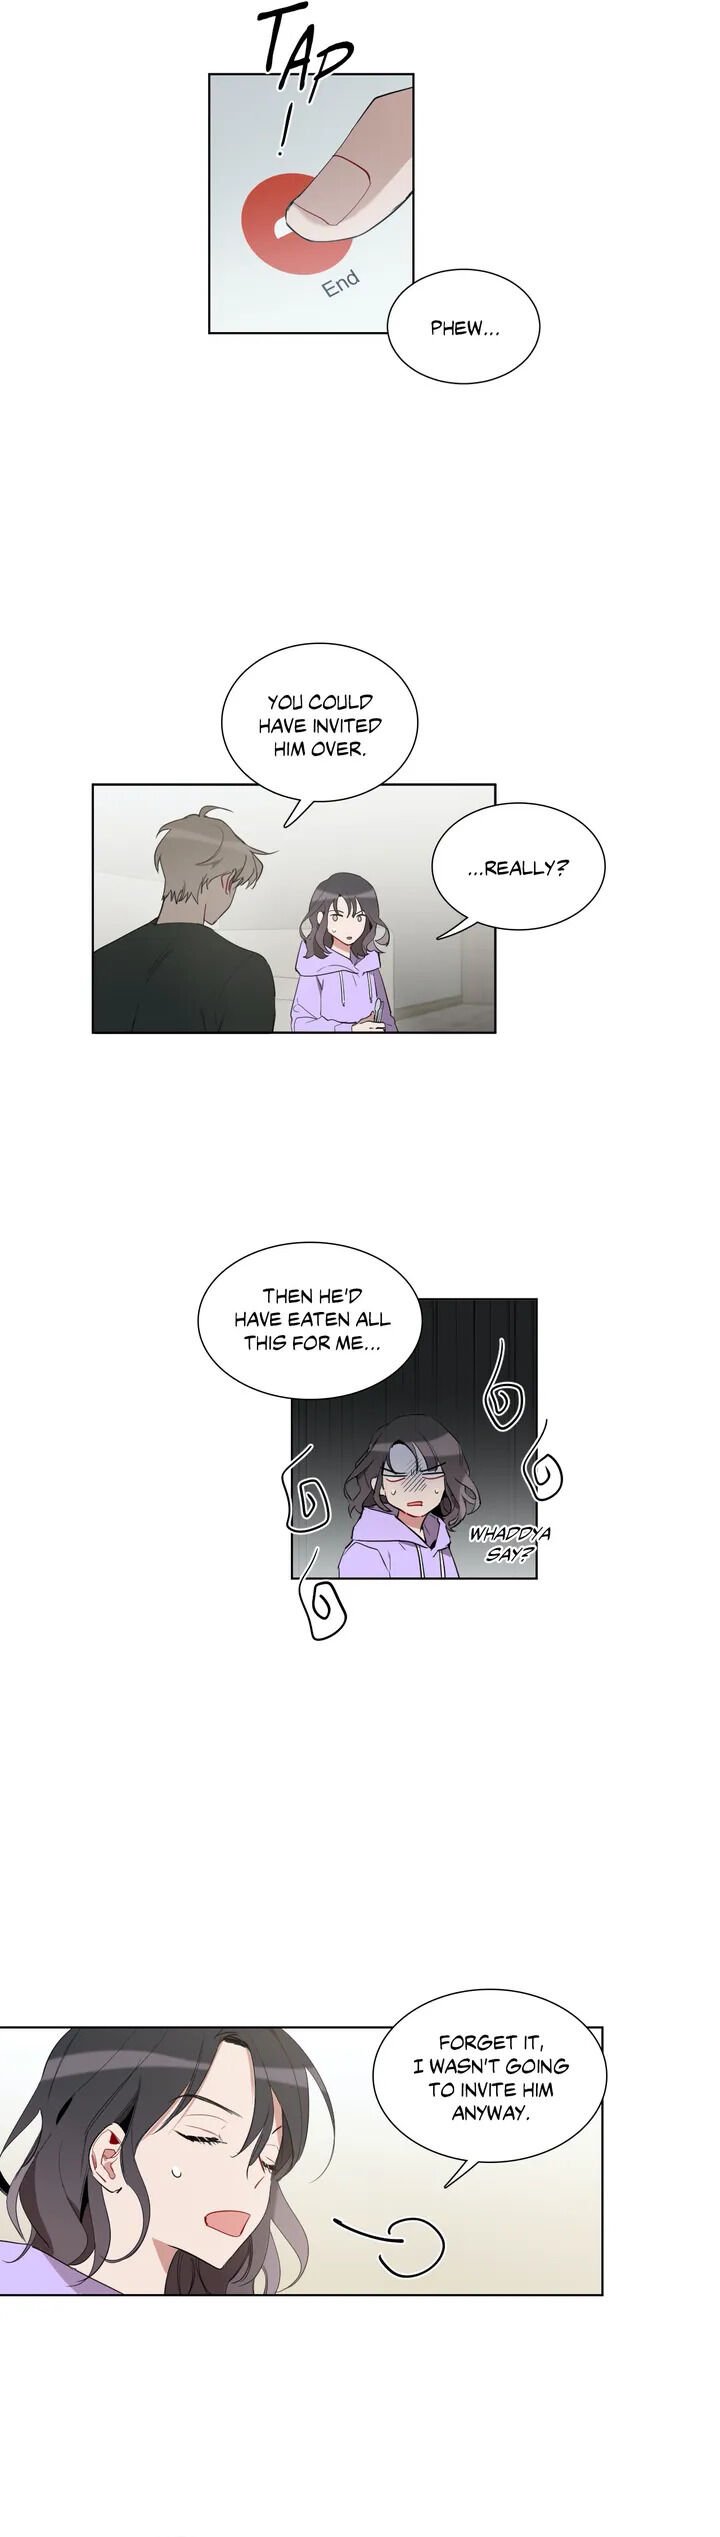 how-to-use-an-angel-chap-30-2